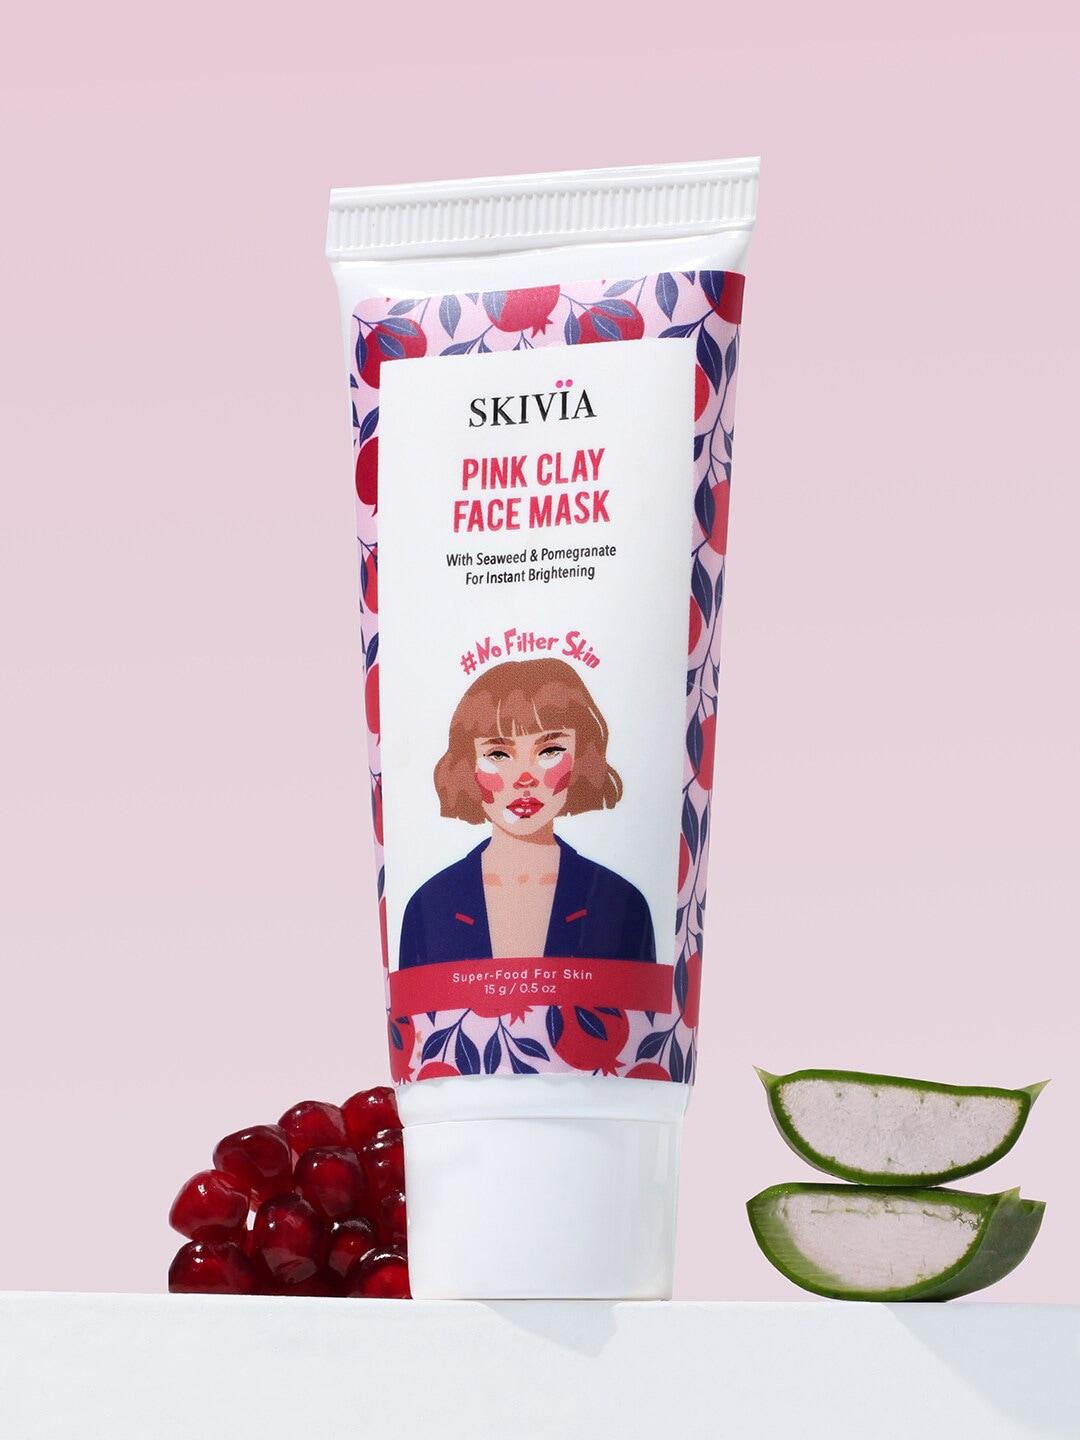 SKIVIA Women No Filter Skin Pink Clay Mini Face Mask with Seaweed & Pomegranate - 15 g